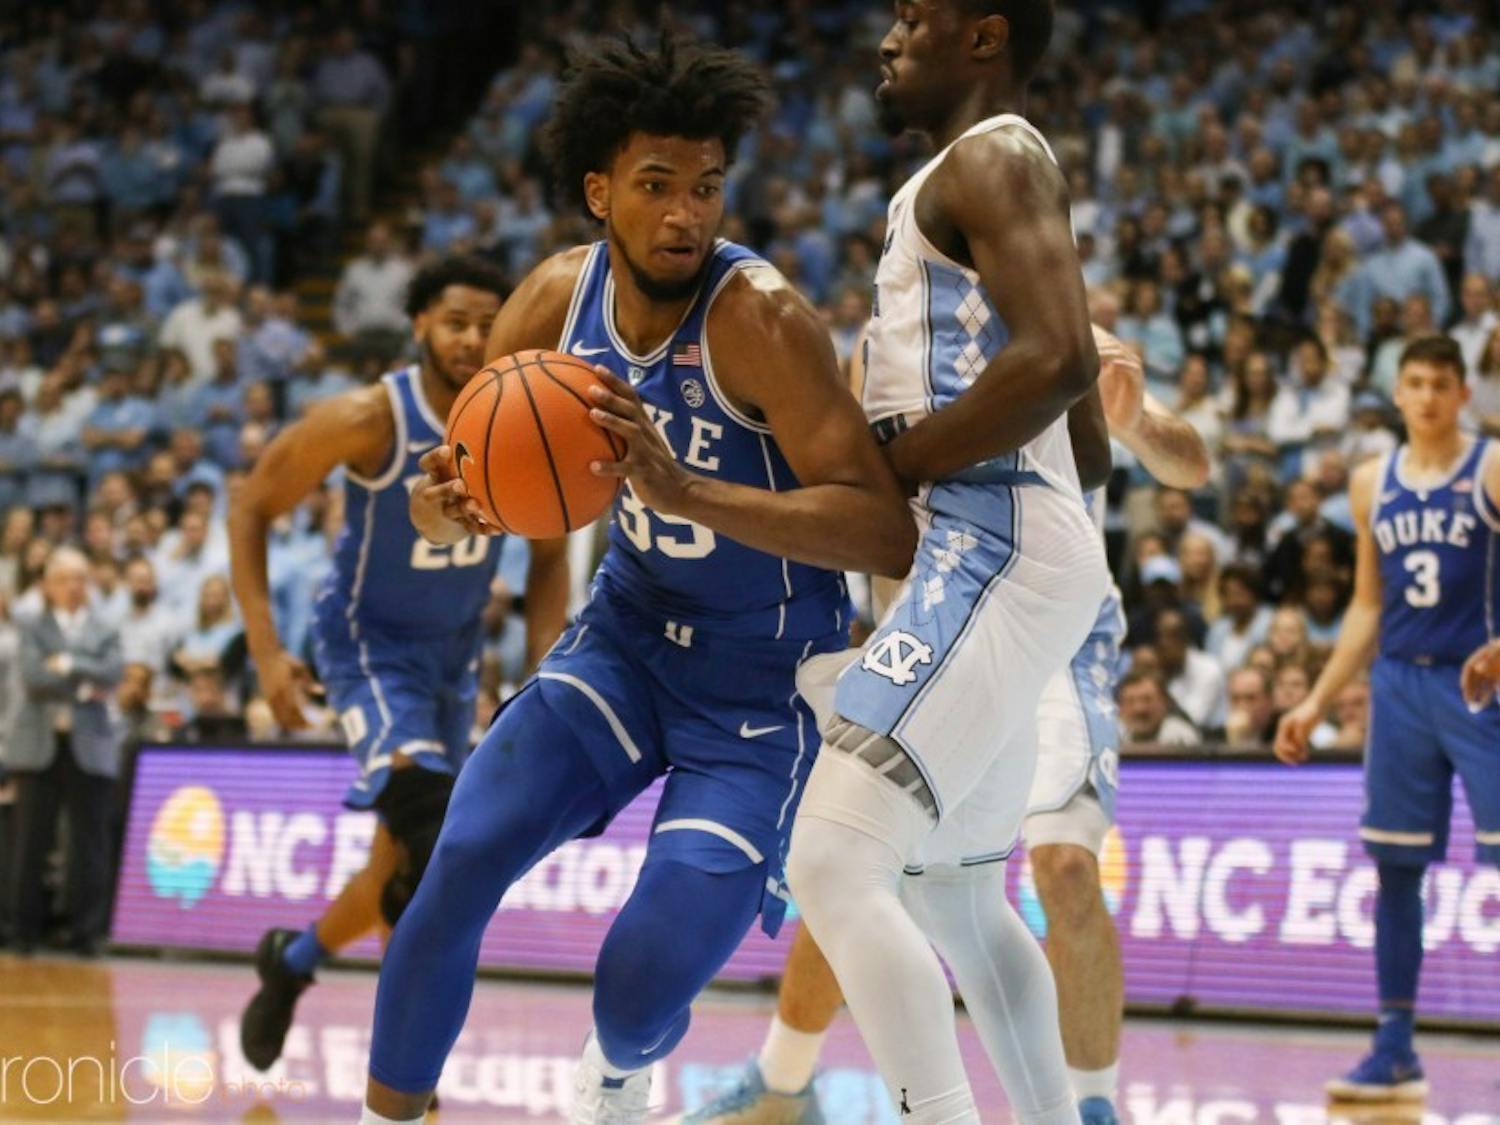 Marvin Bagley III is in double figures already in his first game back.